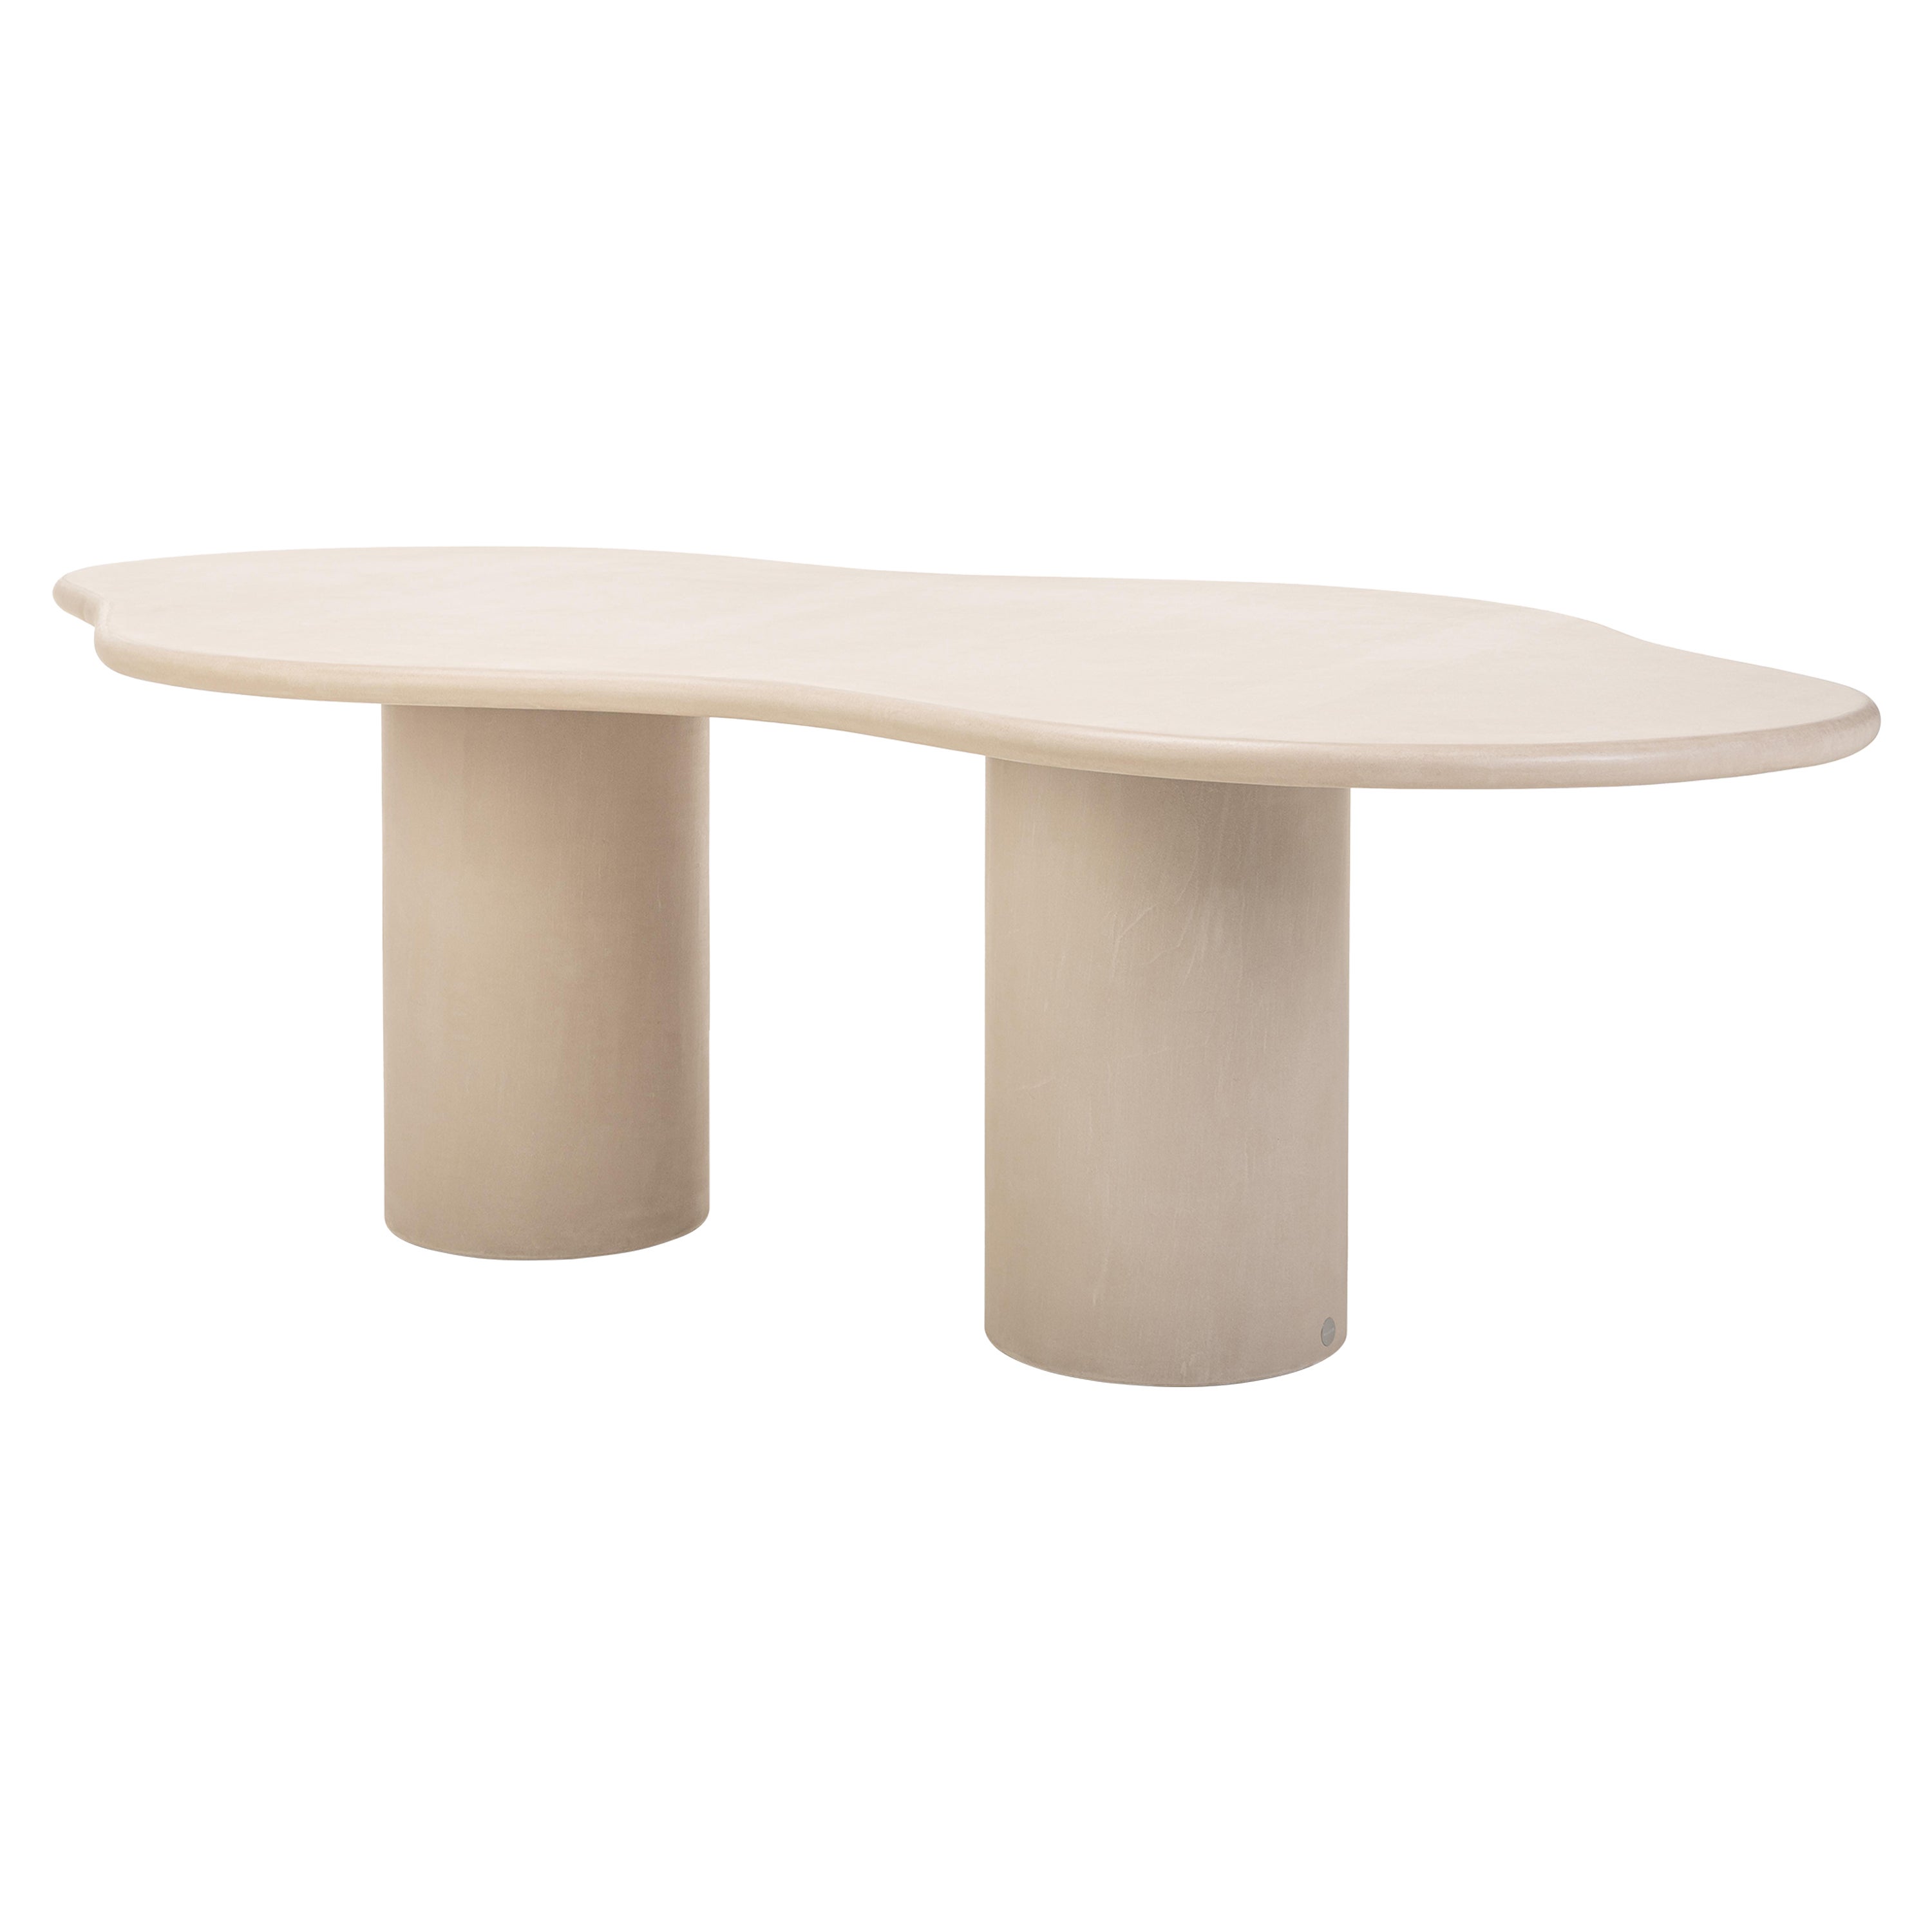 Natural Plaster Dining Table "Fluent" 260 by Isabelle Beaumont For Sale